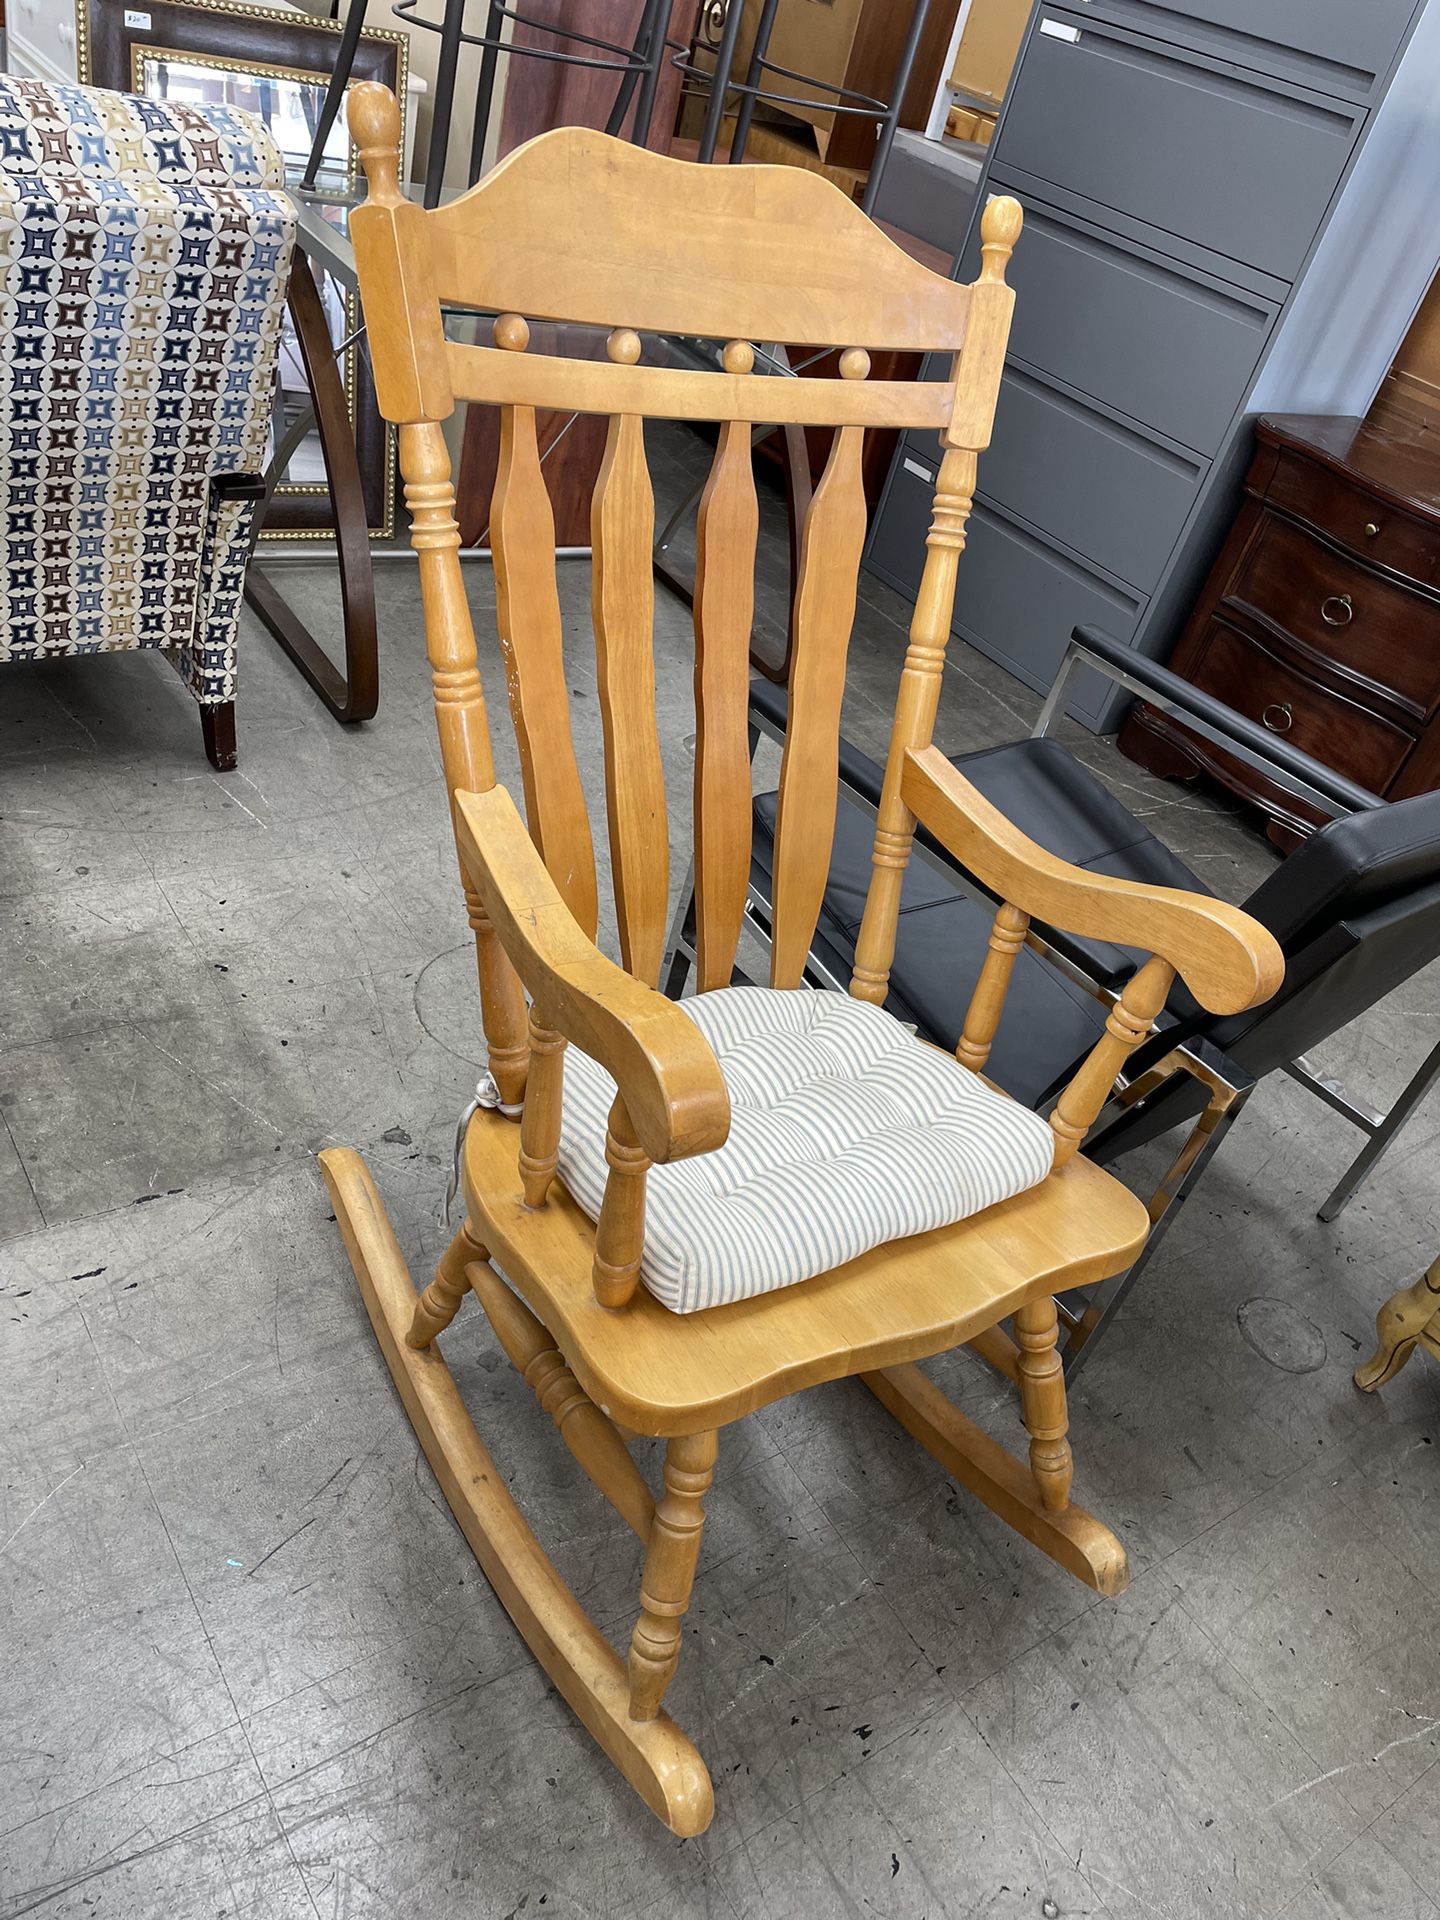 LAKESHORE Solid Wood Rocking Chair Very Sturdy CLEARANCE ITEM